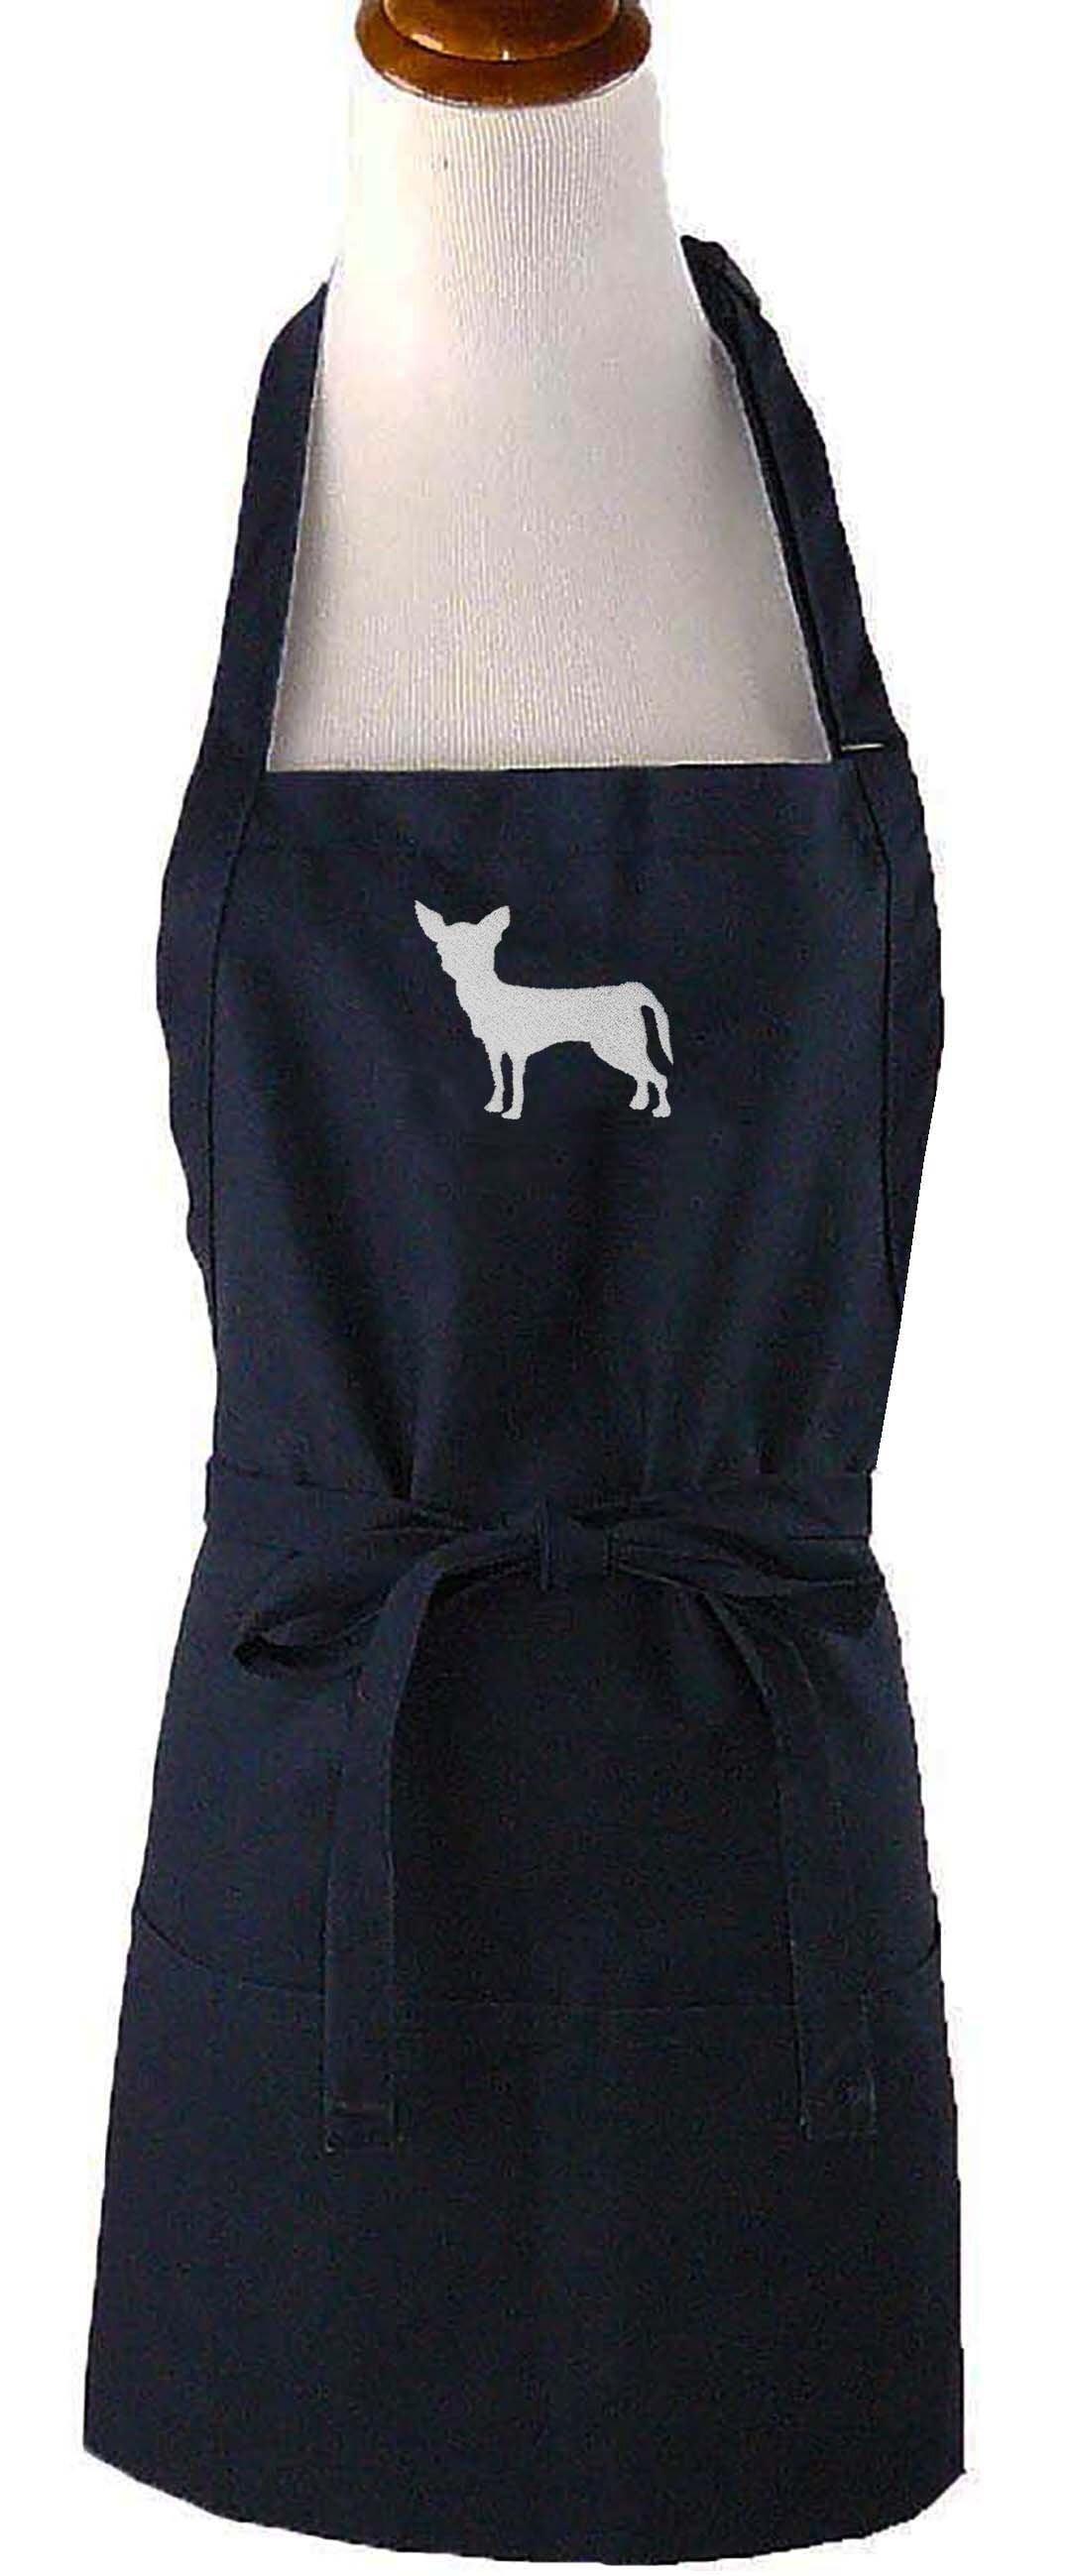 Paw Print & Pets Silhouette Monogram Apron Child or Adult Size Embroidered Custom Pet Groomer Smock Animal Shelter